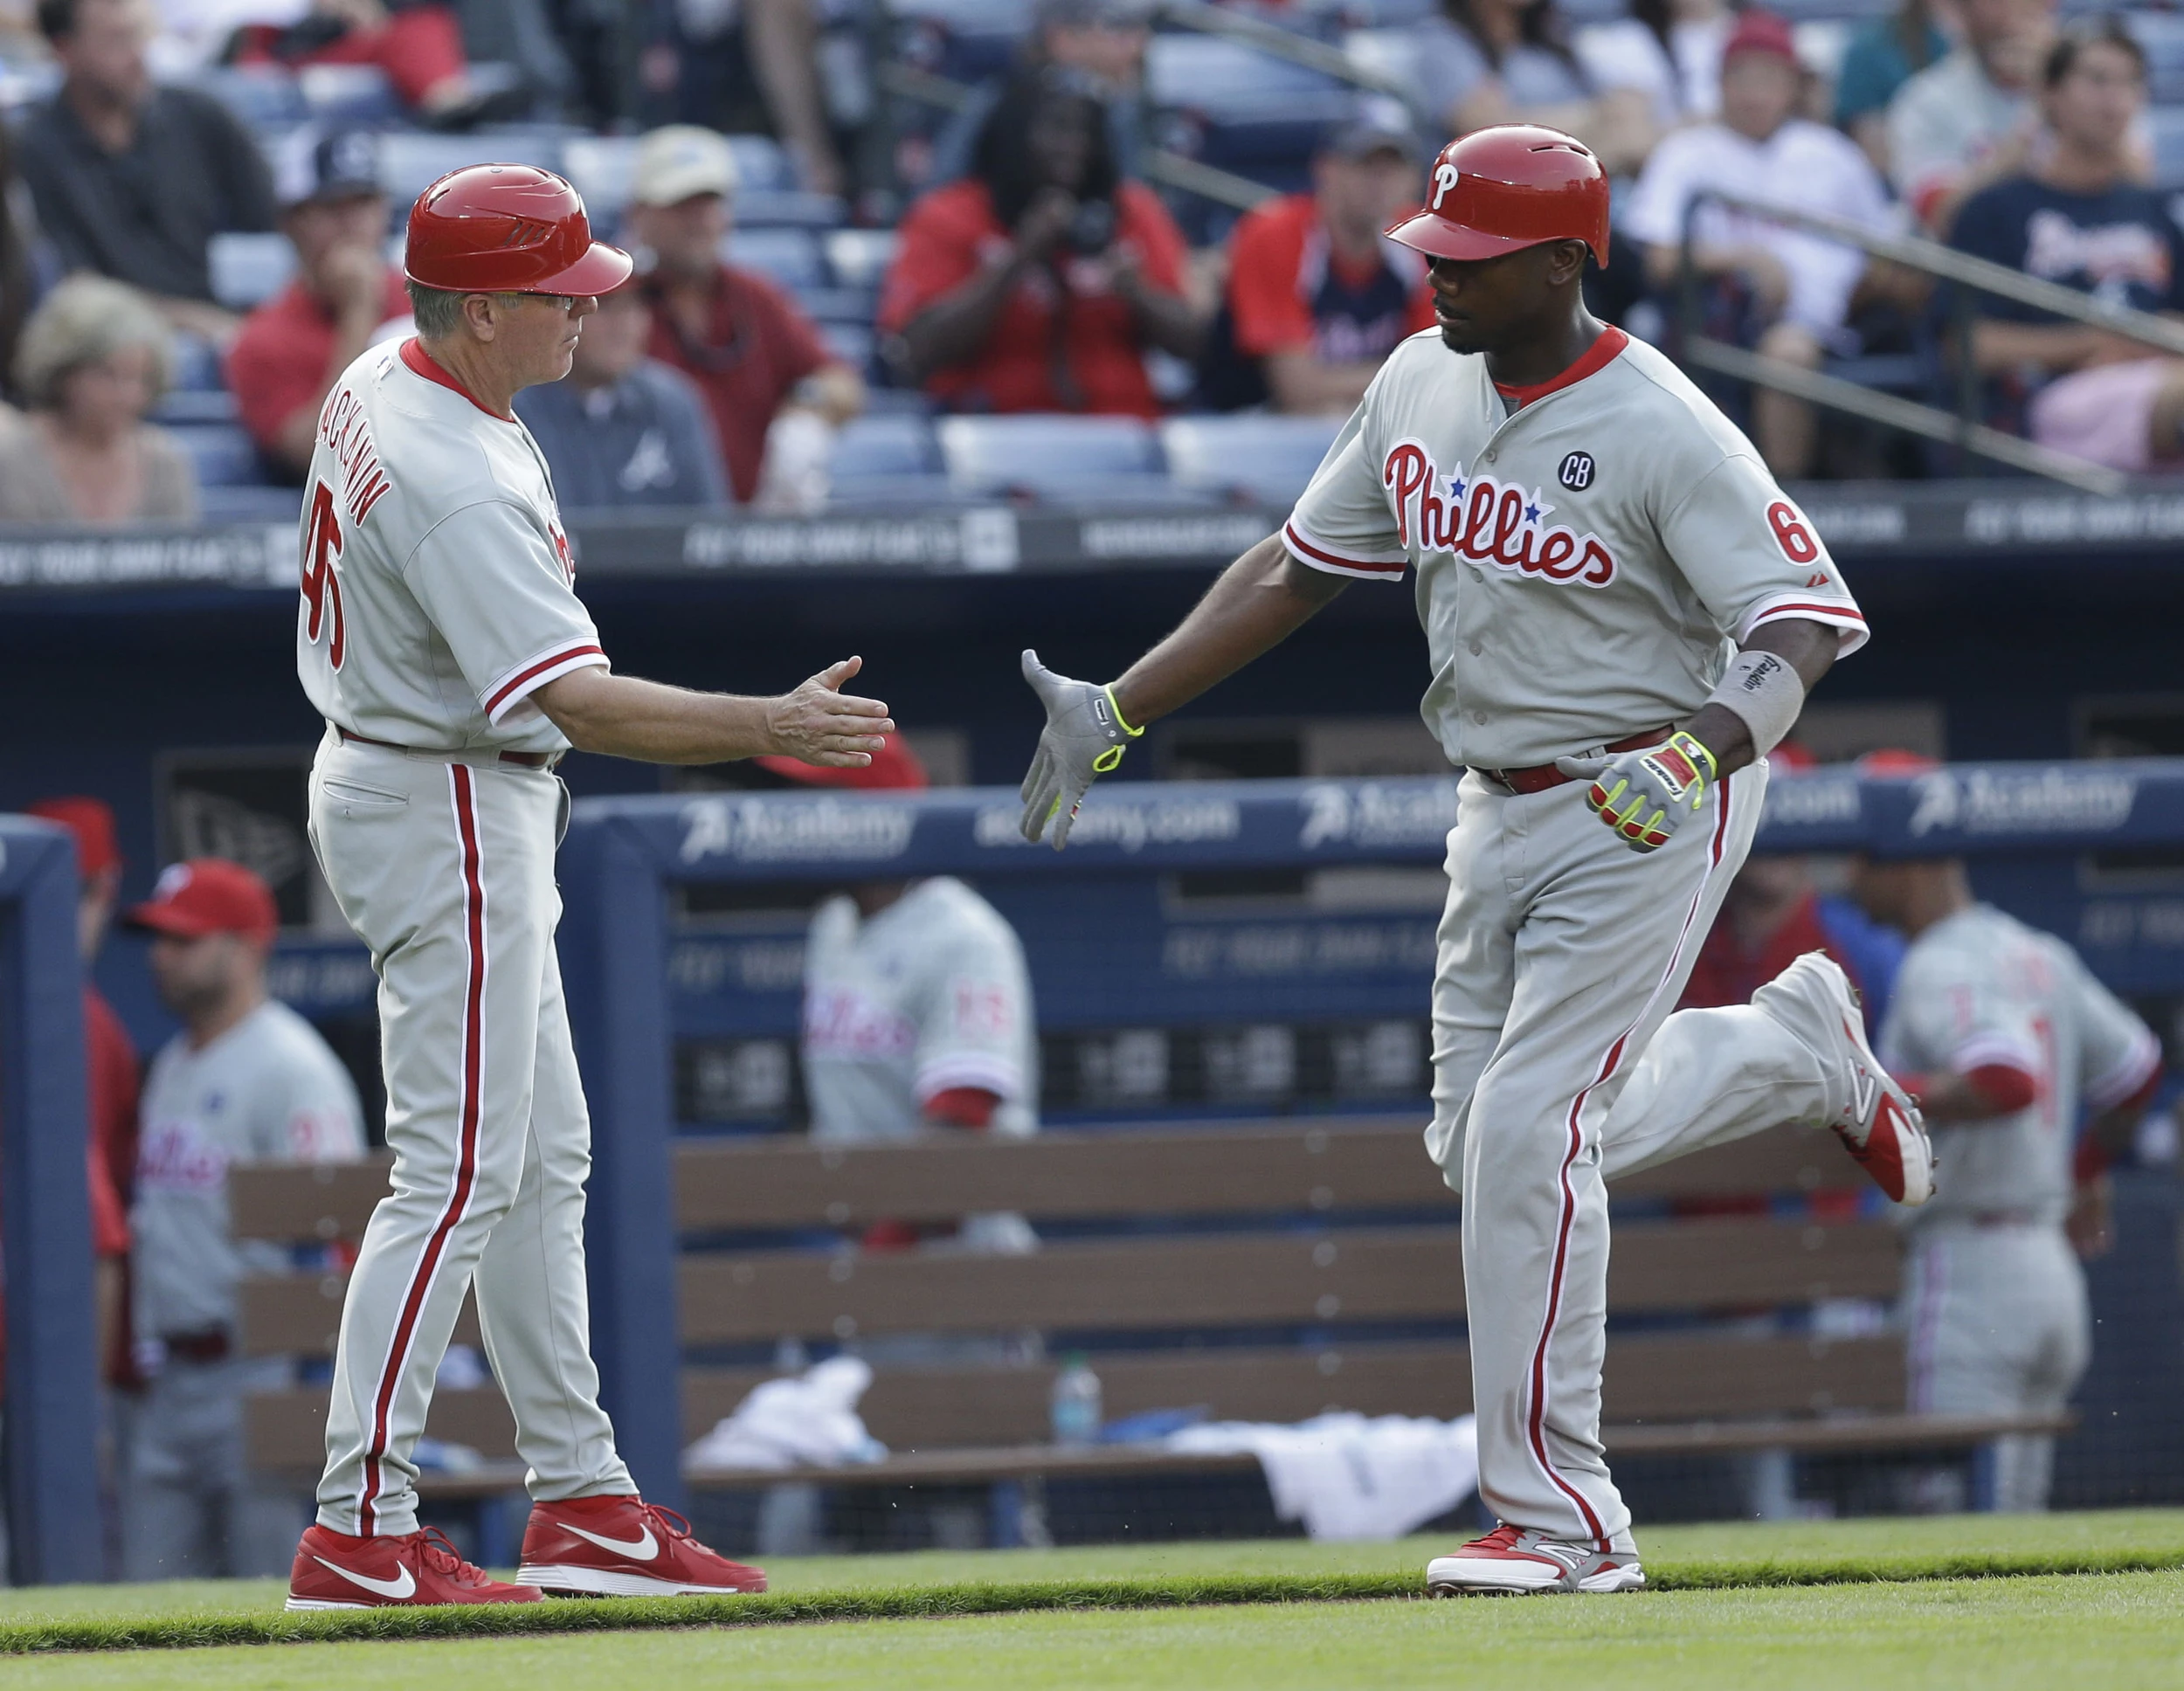 Phillies score five runs in 13th inning to beat Braves